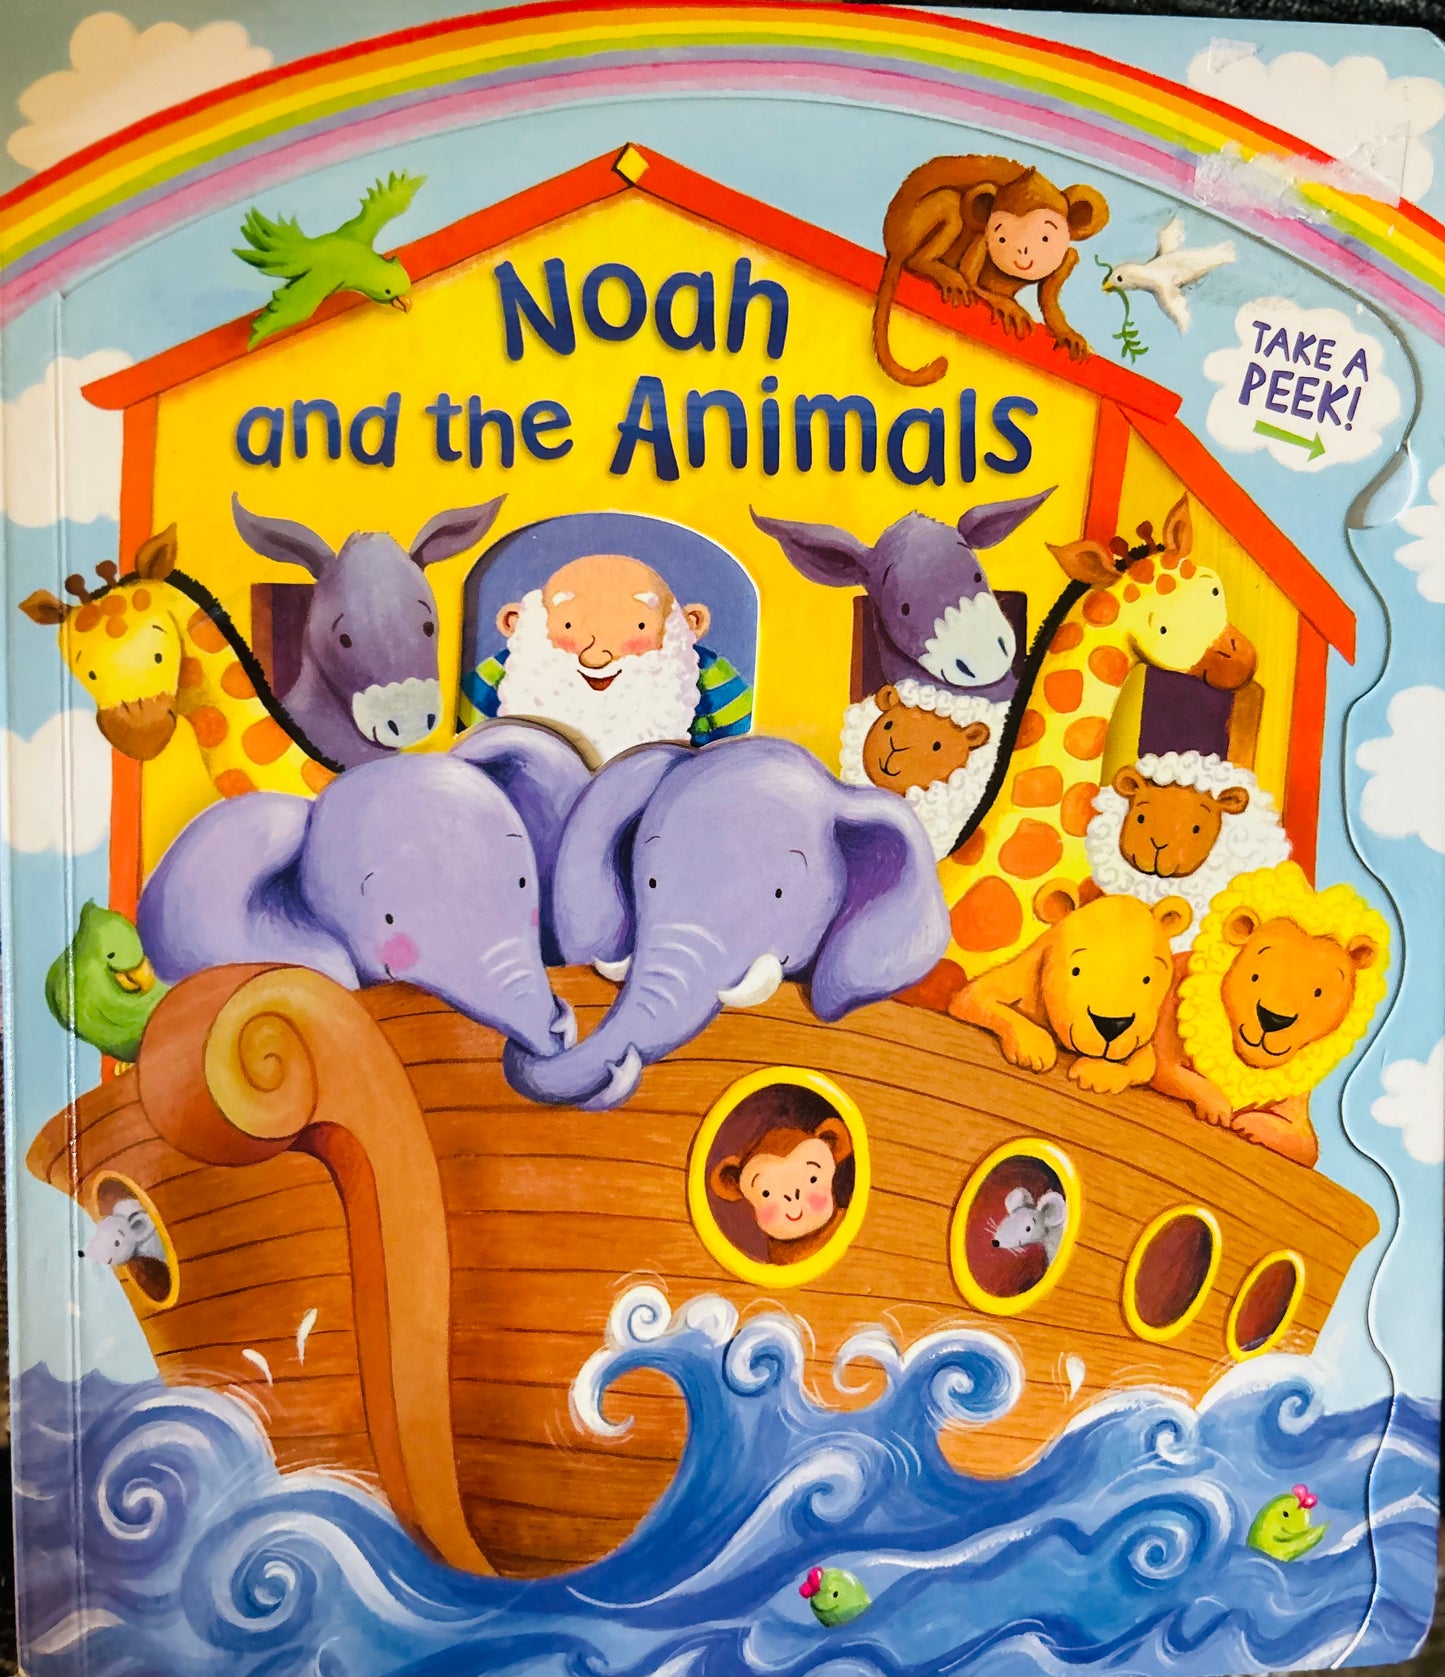 Noah And the Animals